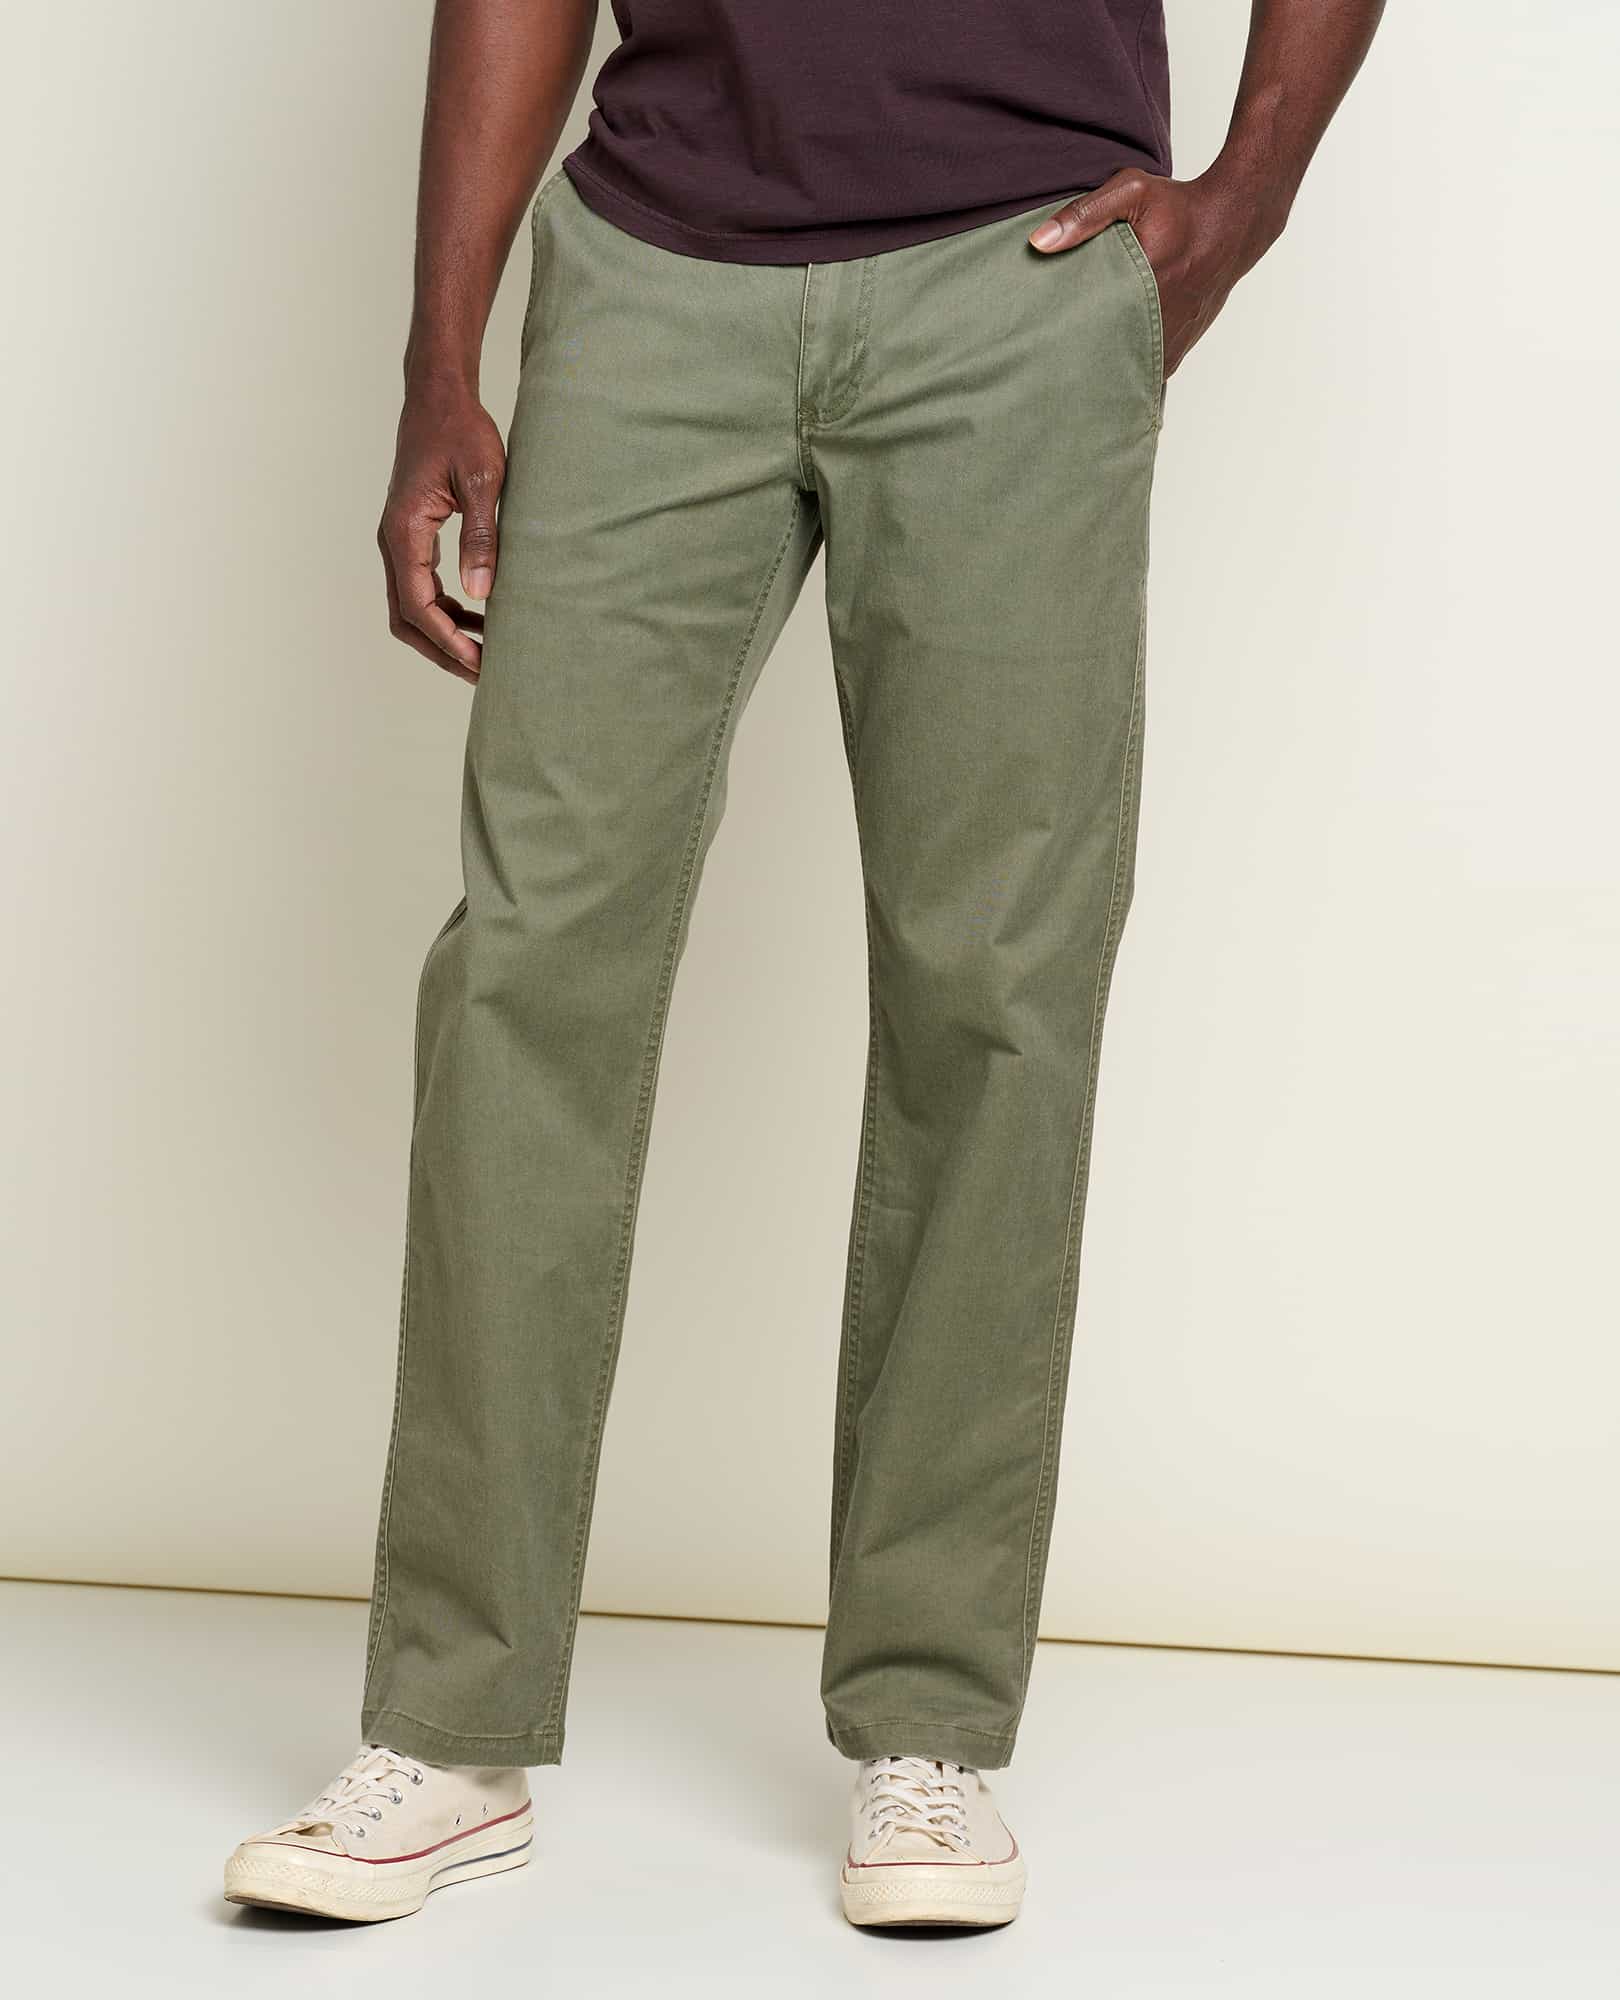 Men's Mission Ridge Pant | by Toad&Co